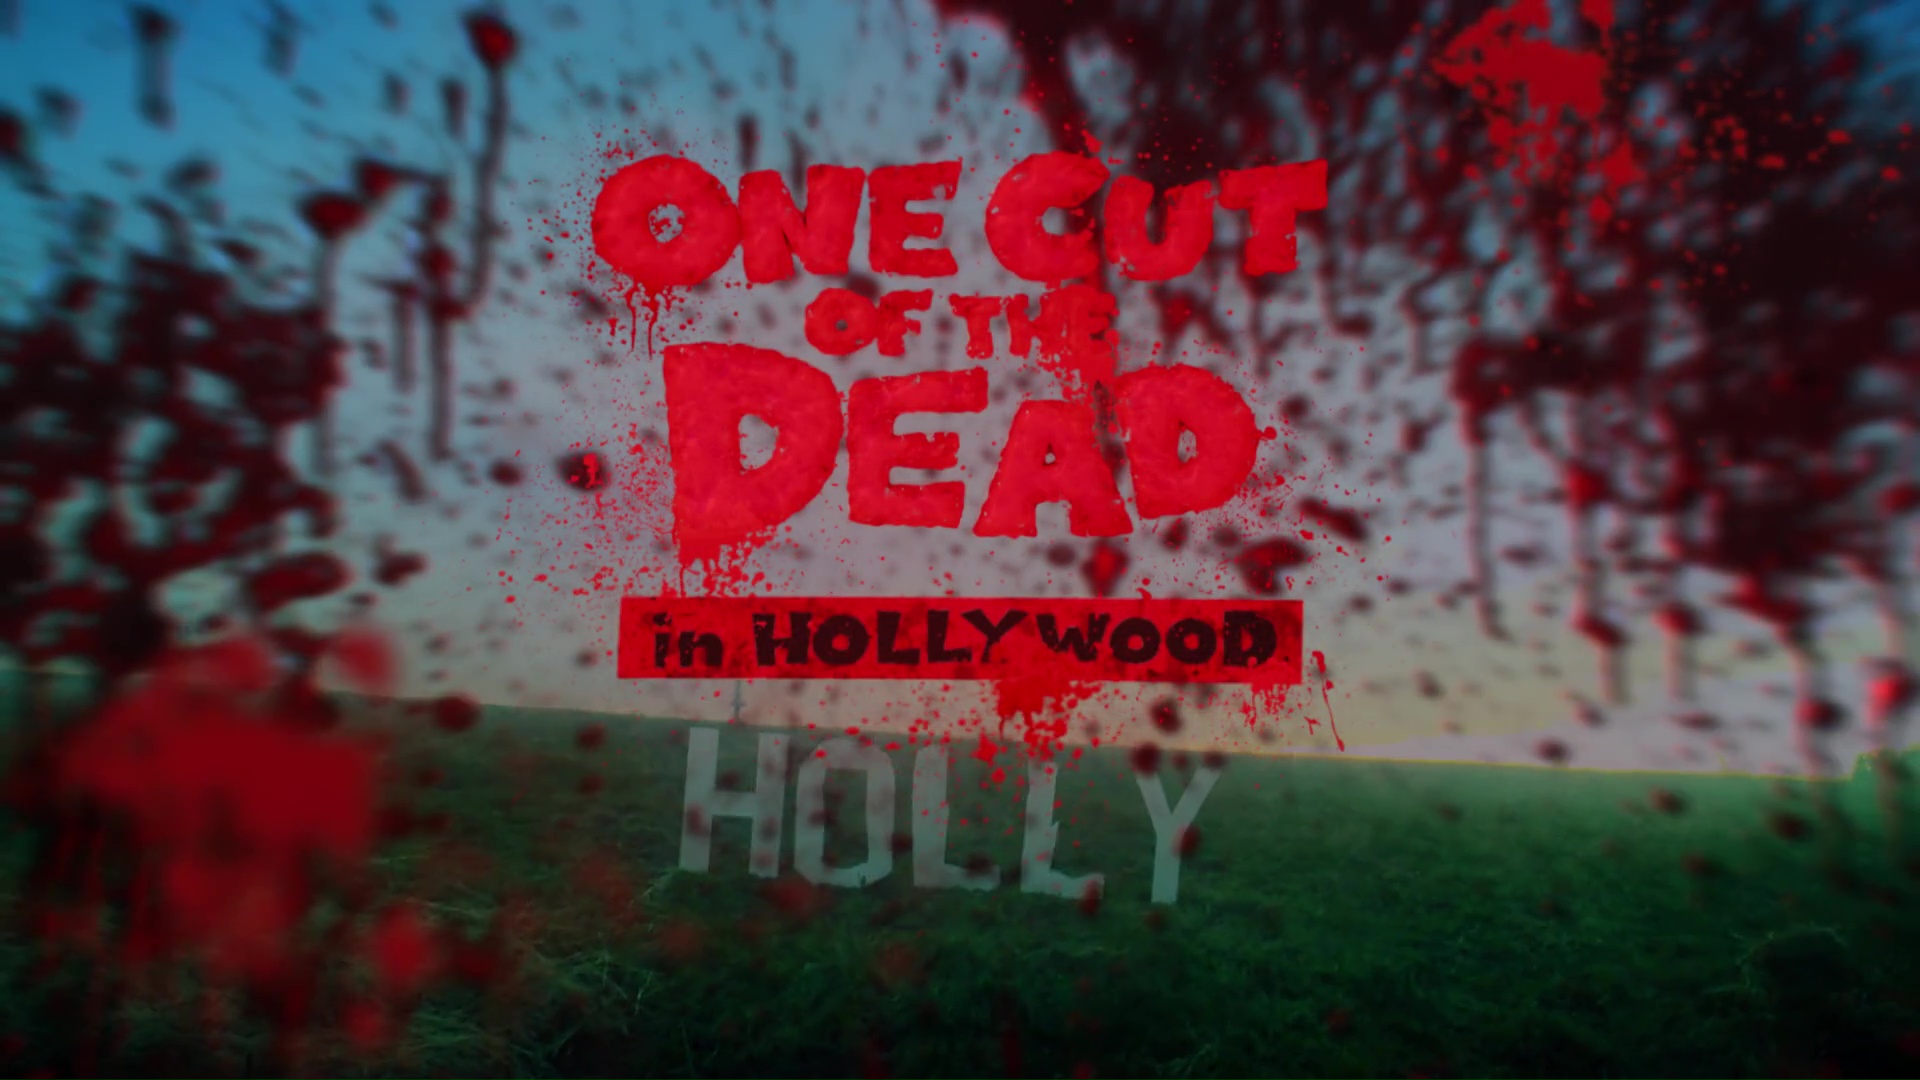 [Film] One Cut of the Dead in Hollywood, de Nakaizumi Yûya (2019)